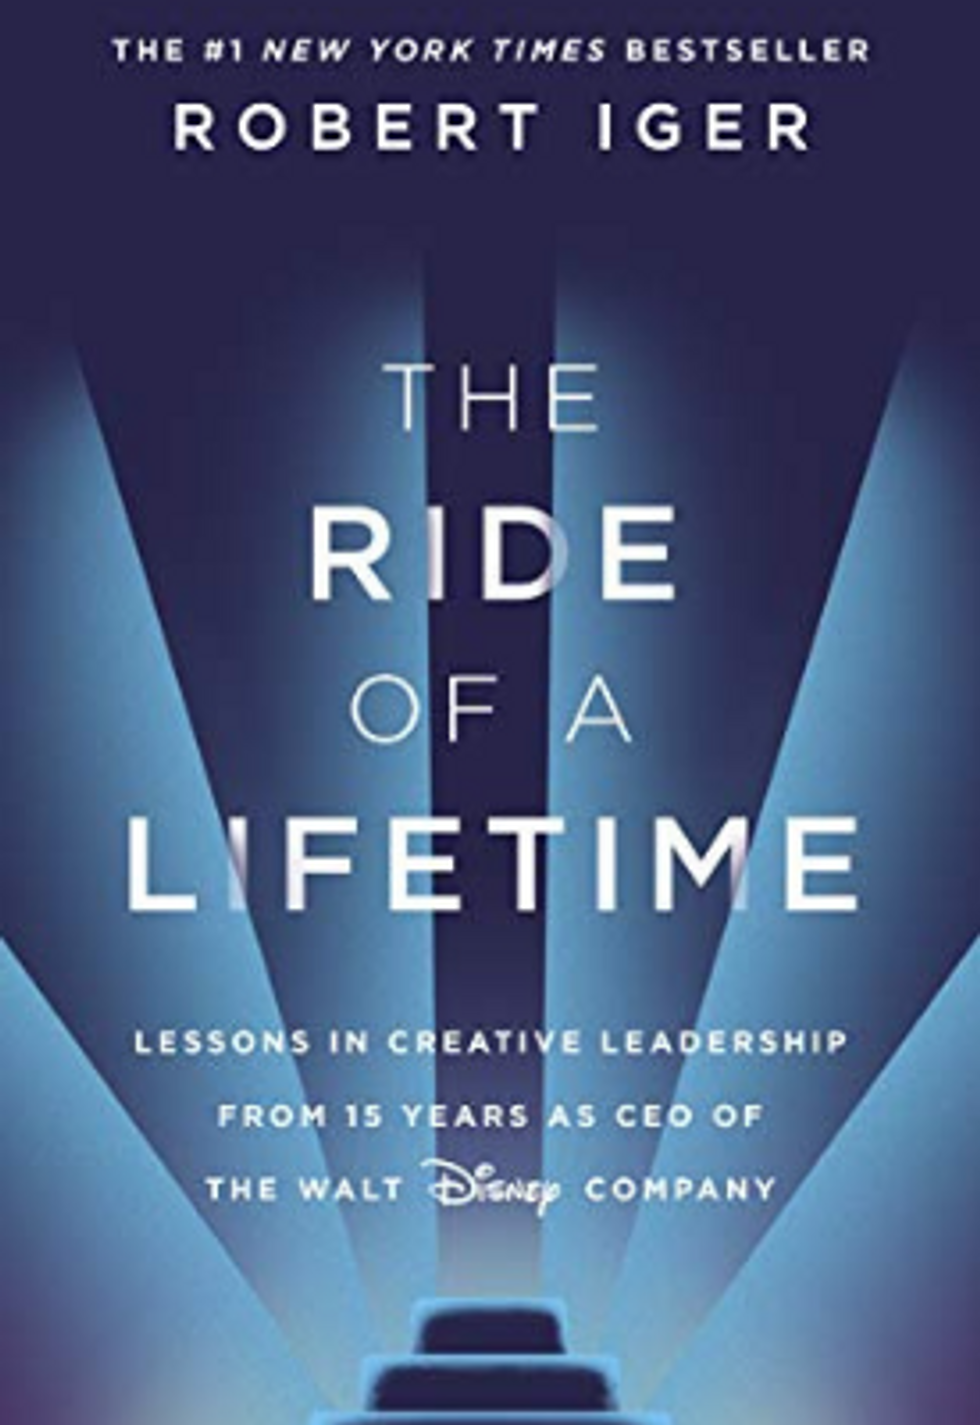 The front cover of the book "The Ride of a Lifetime: Lessons Learned from 15 Years as CEO of the Walt Disney Company" by Robert Iger and Joel Lovell